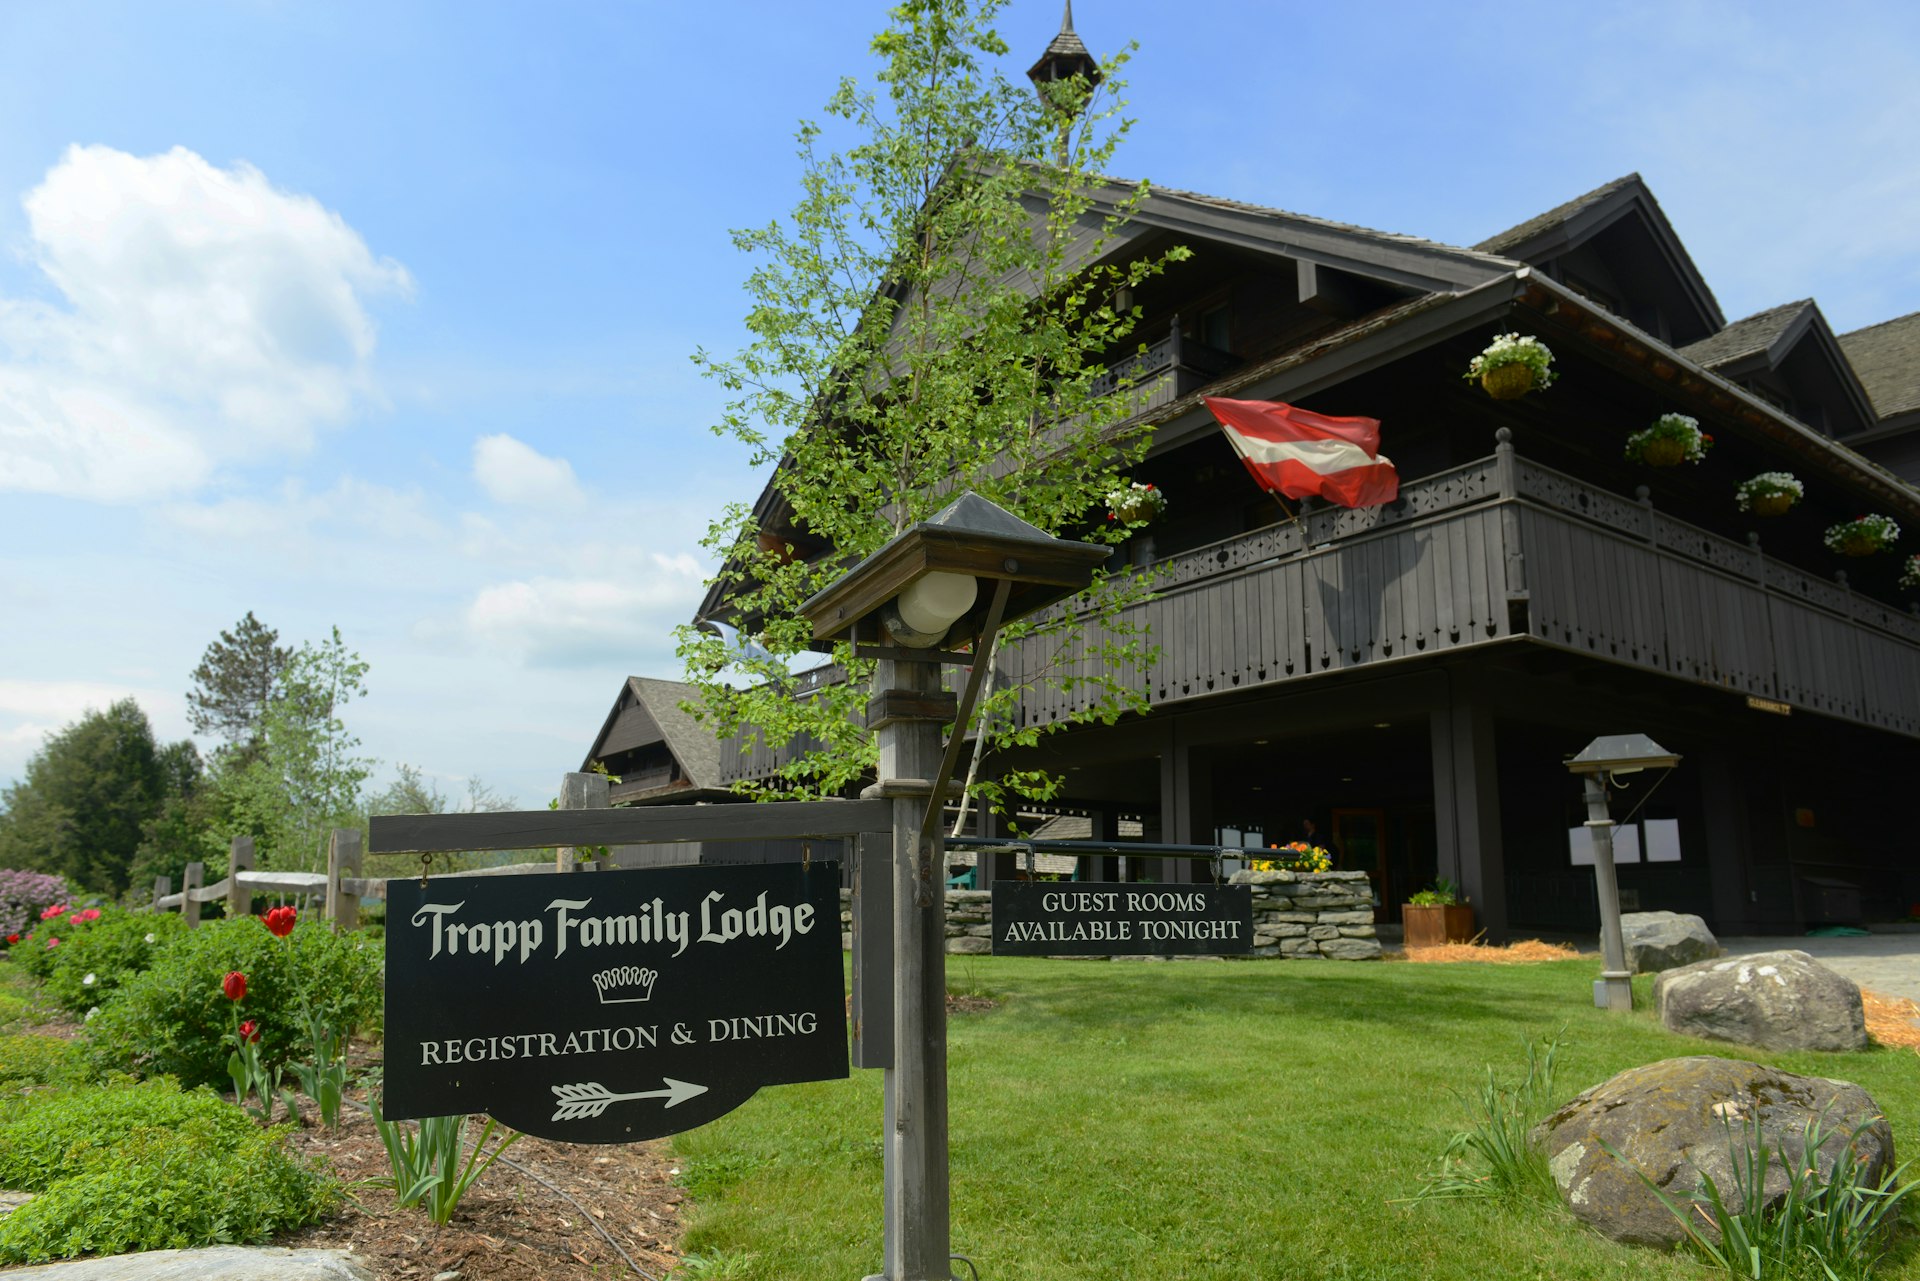 The main entrance to the Trapp Family Lodge, Stowe, Vermont, USA